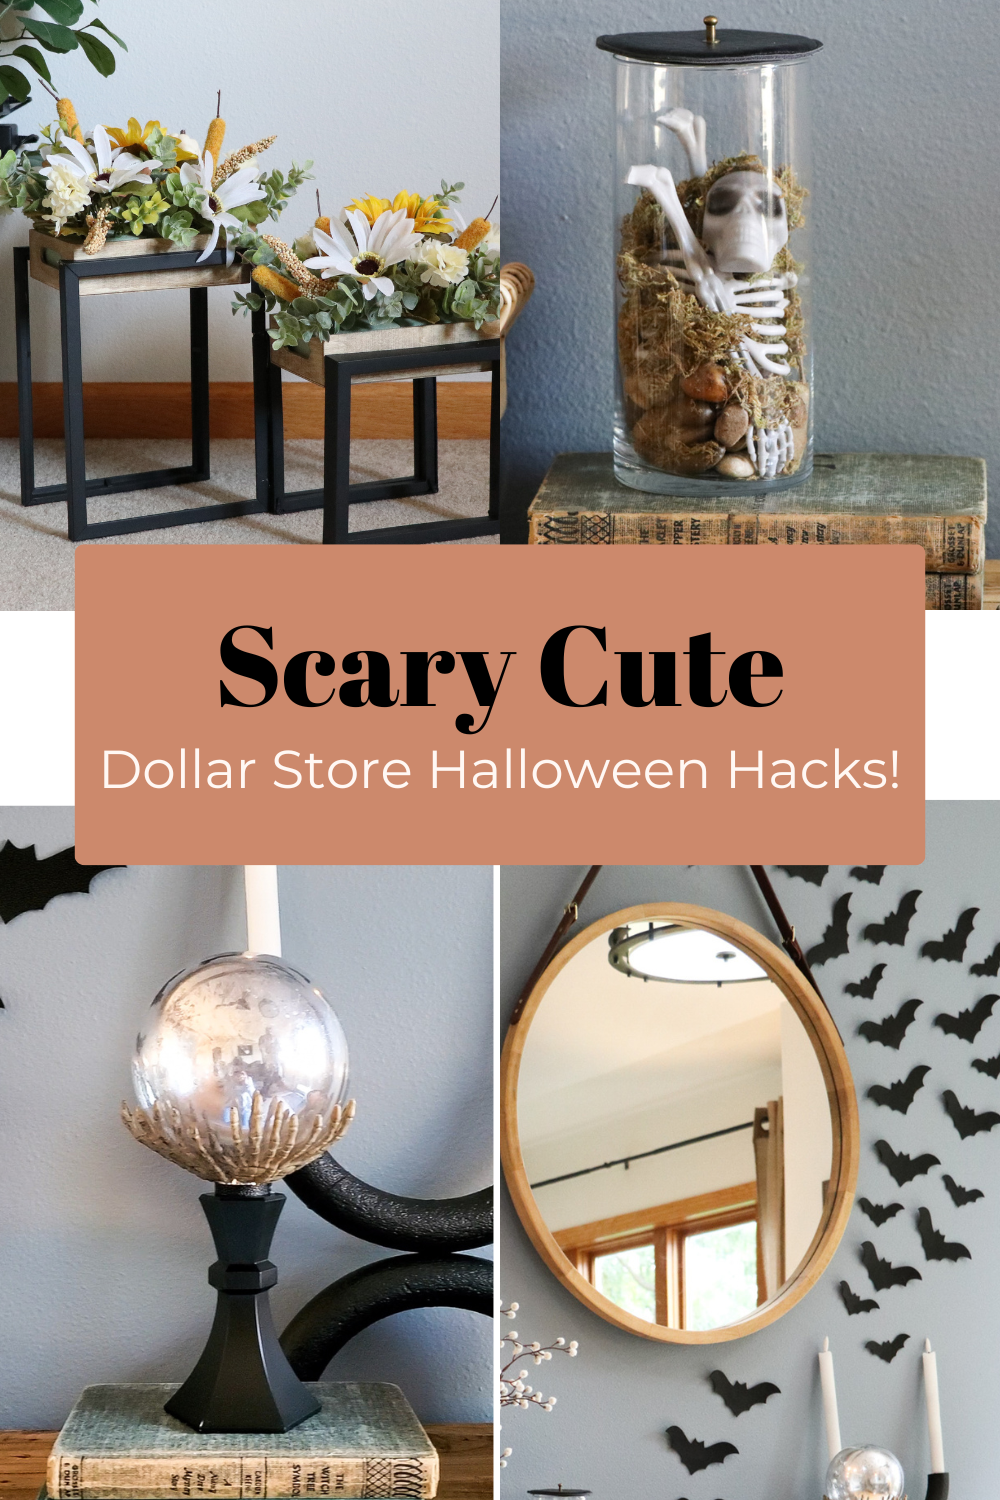 Spooky Sallie Tomato Hacks | 10 Easy Craft Projects for Halloween